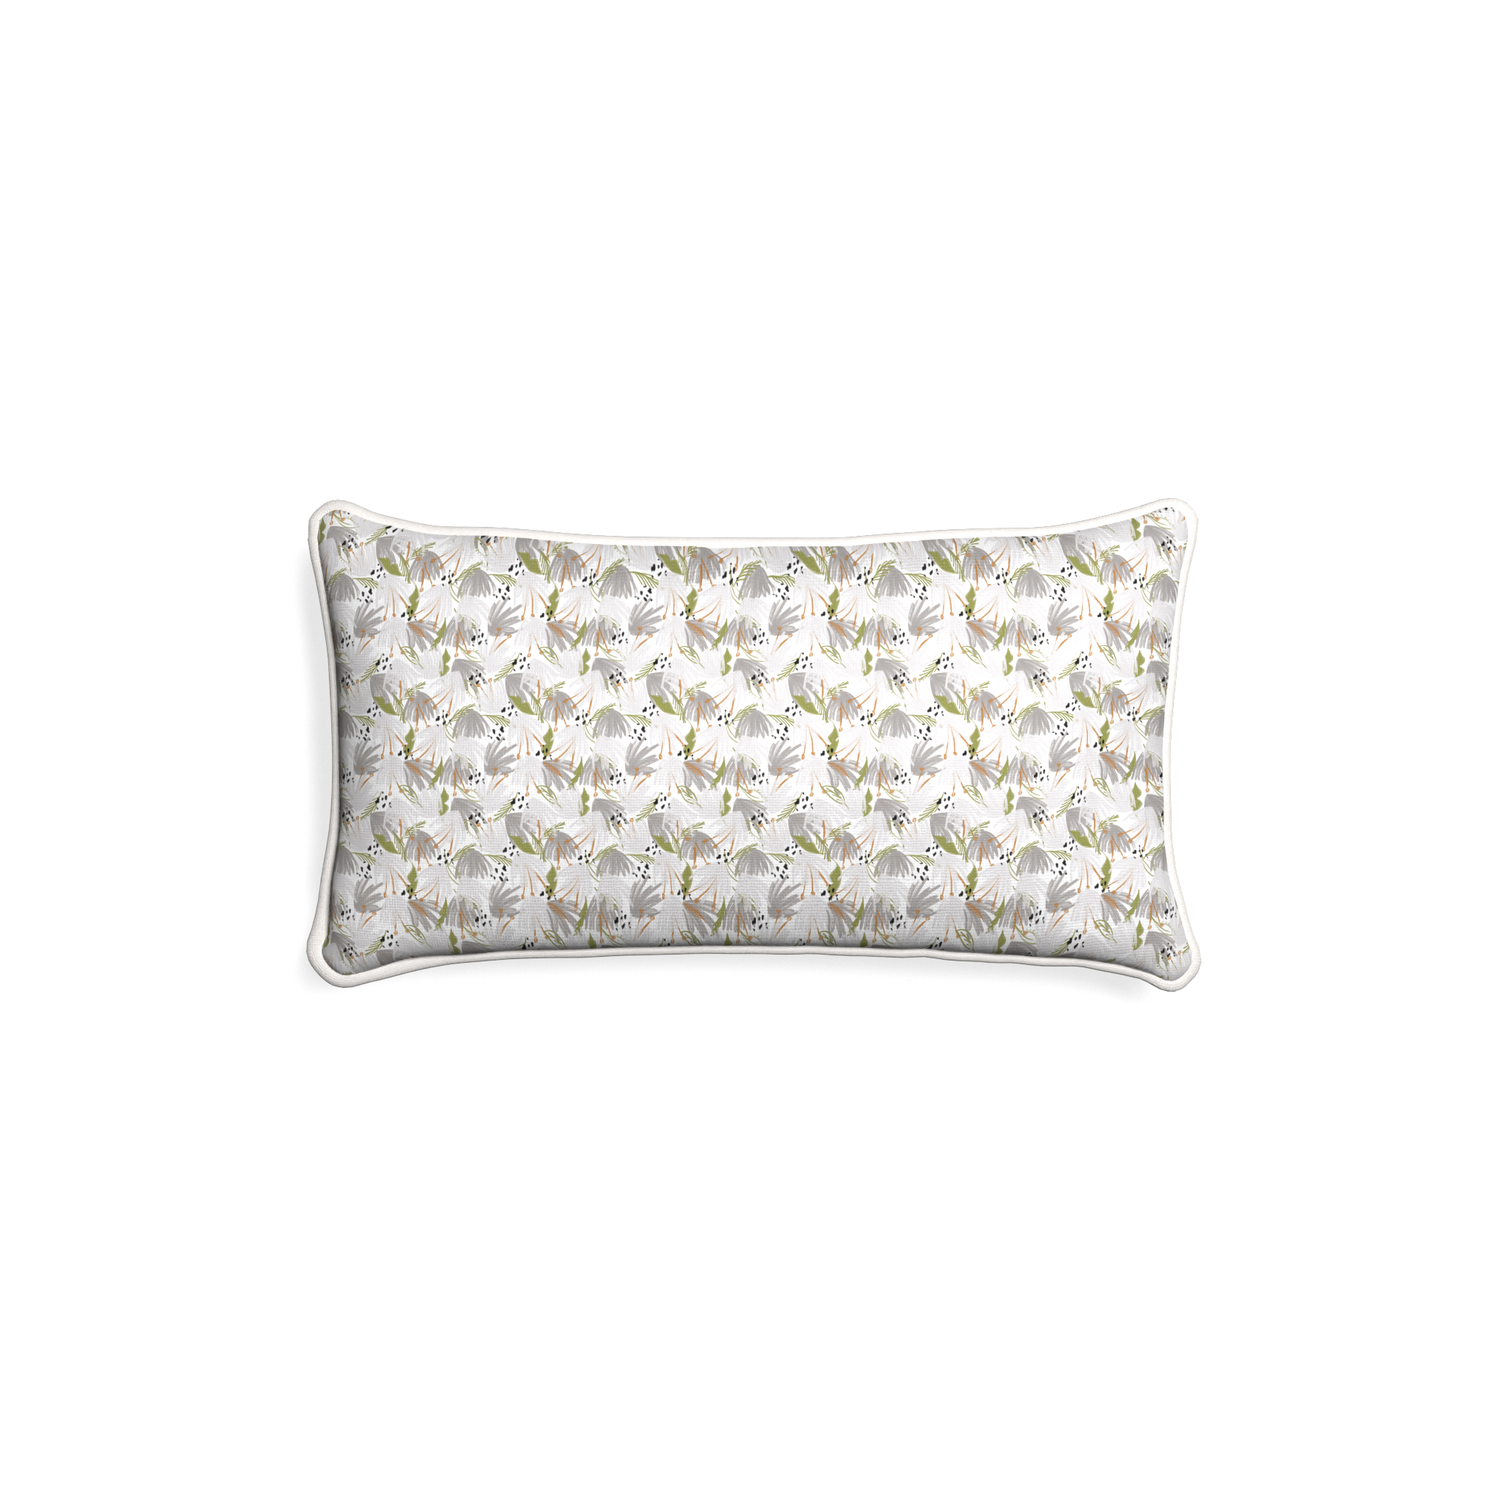 Petite-lumbar eden grey custom grey floralpillow with snow piping on white background